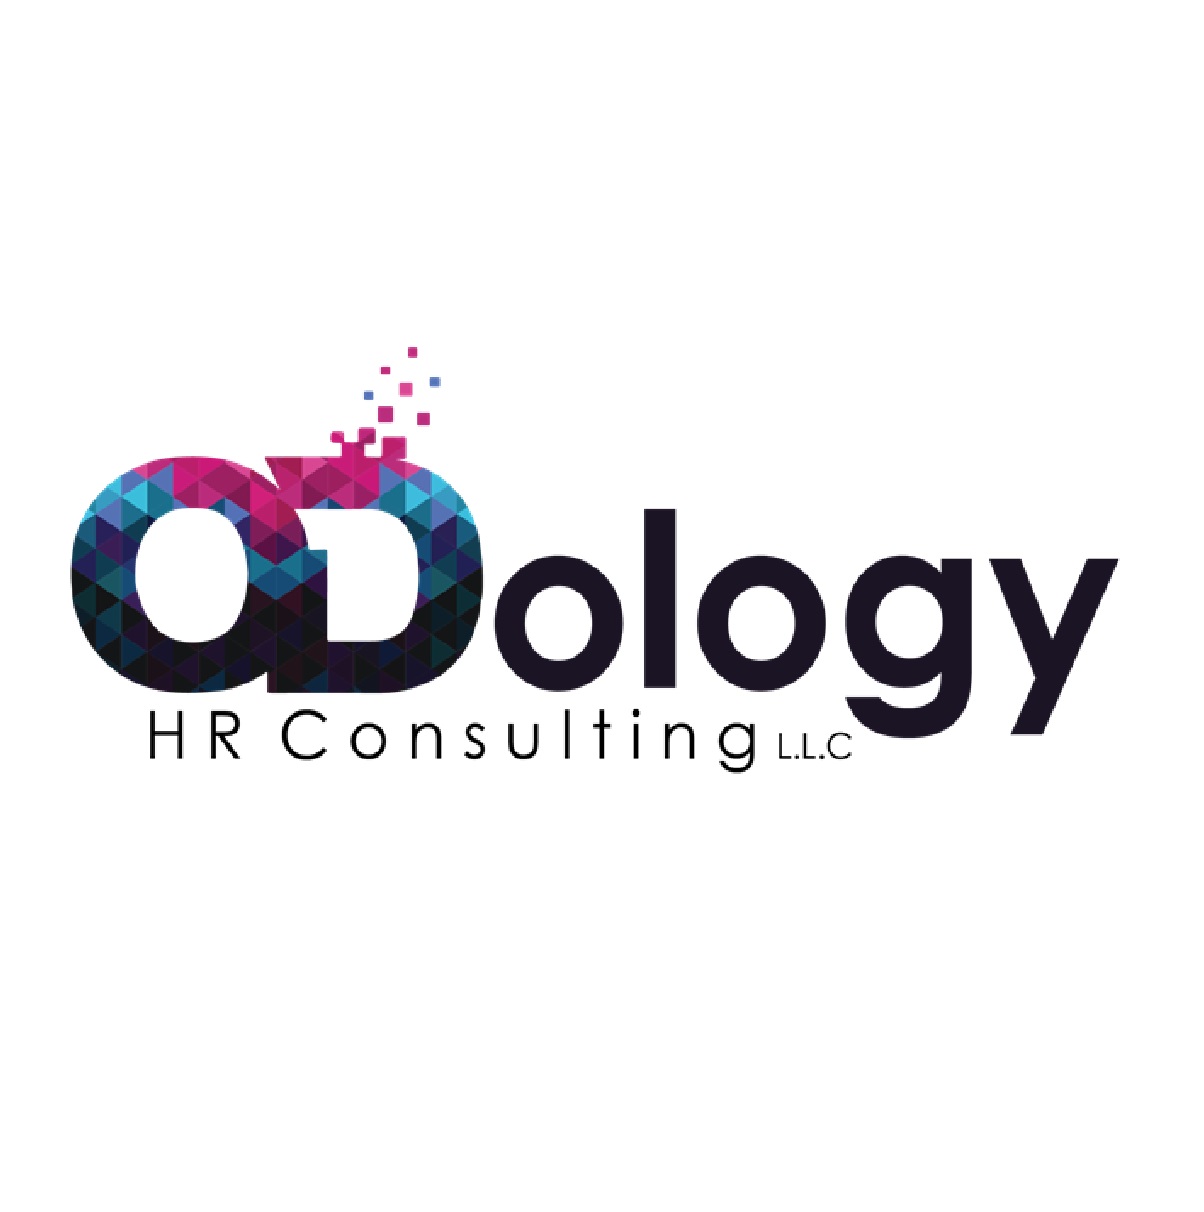 Odology HR Consulting